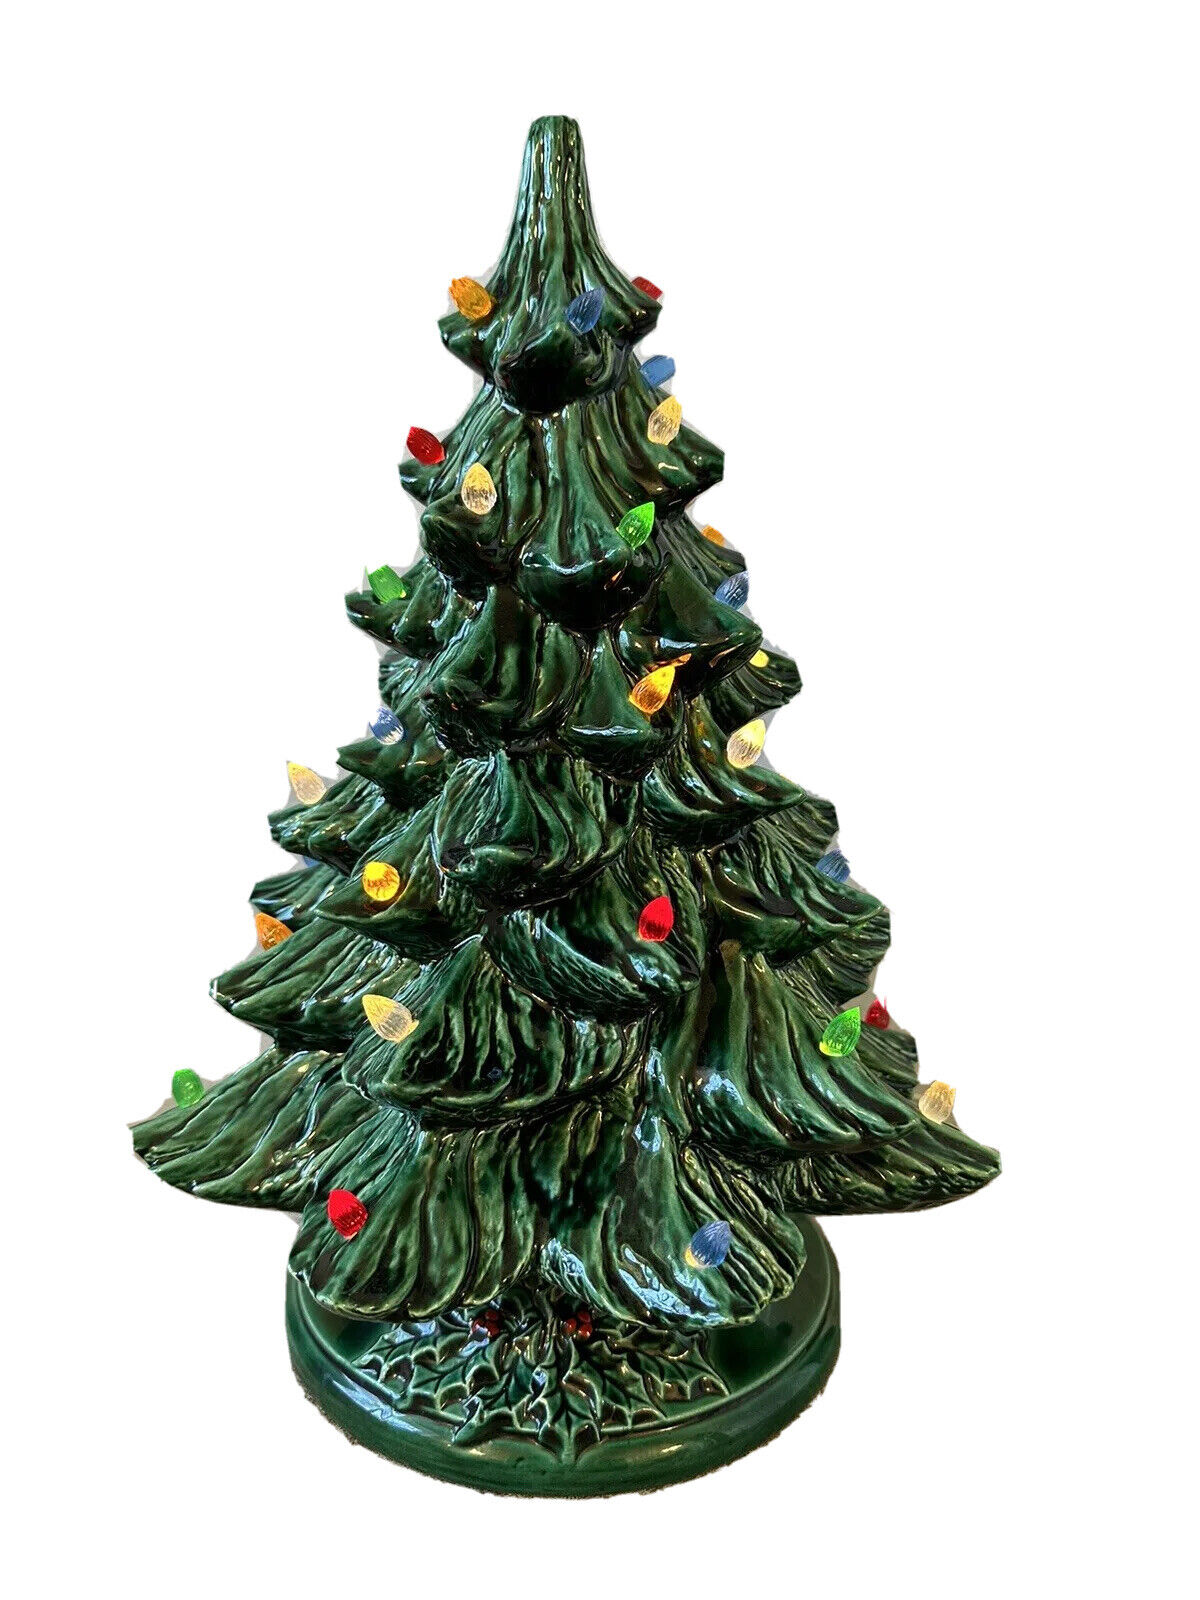 Vintage Howell’s Mold Ceramic Christmas Tree, 16 in, Lights Up. READ